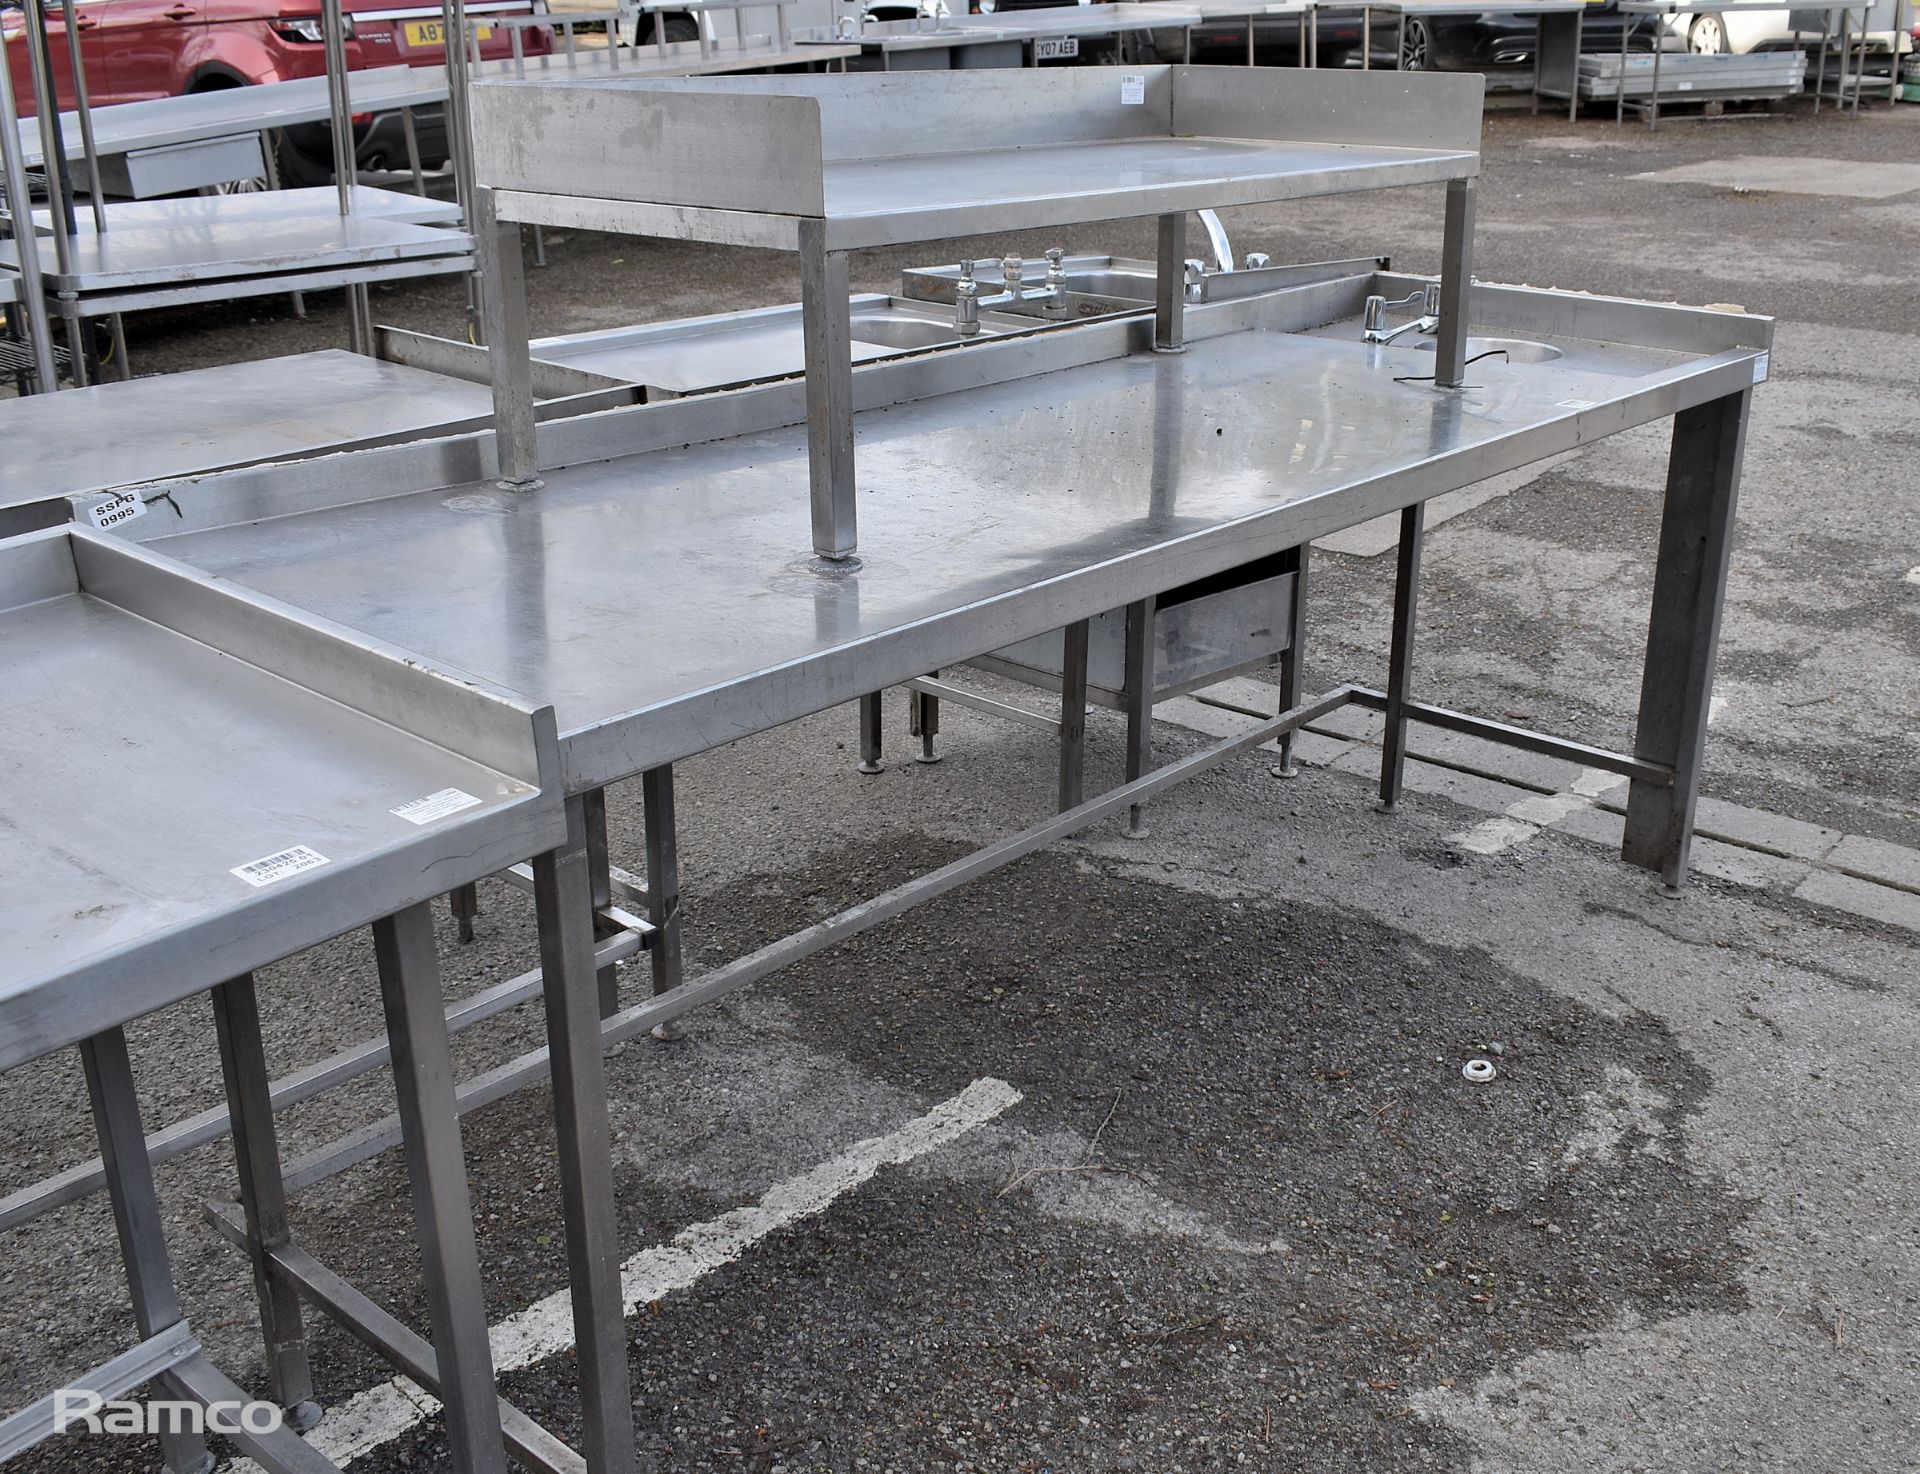 Stainless steel table with small sink bowl and upstand - dimensions: 225 x 70 x 95cm - Image 6 of 6